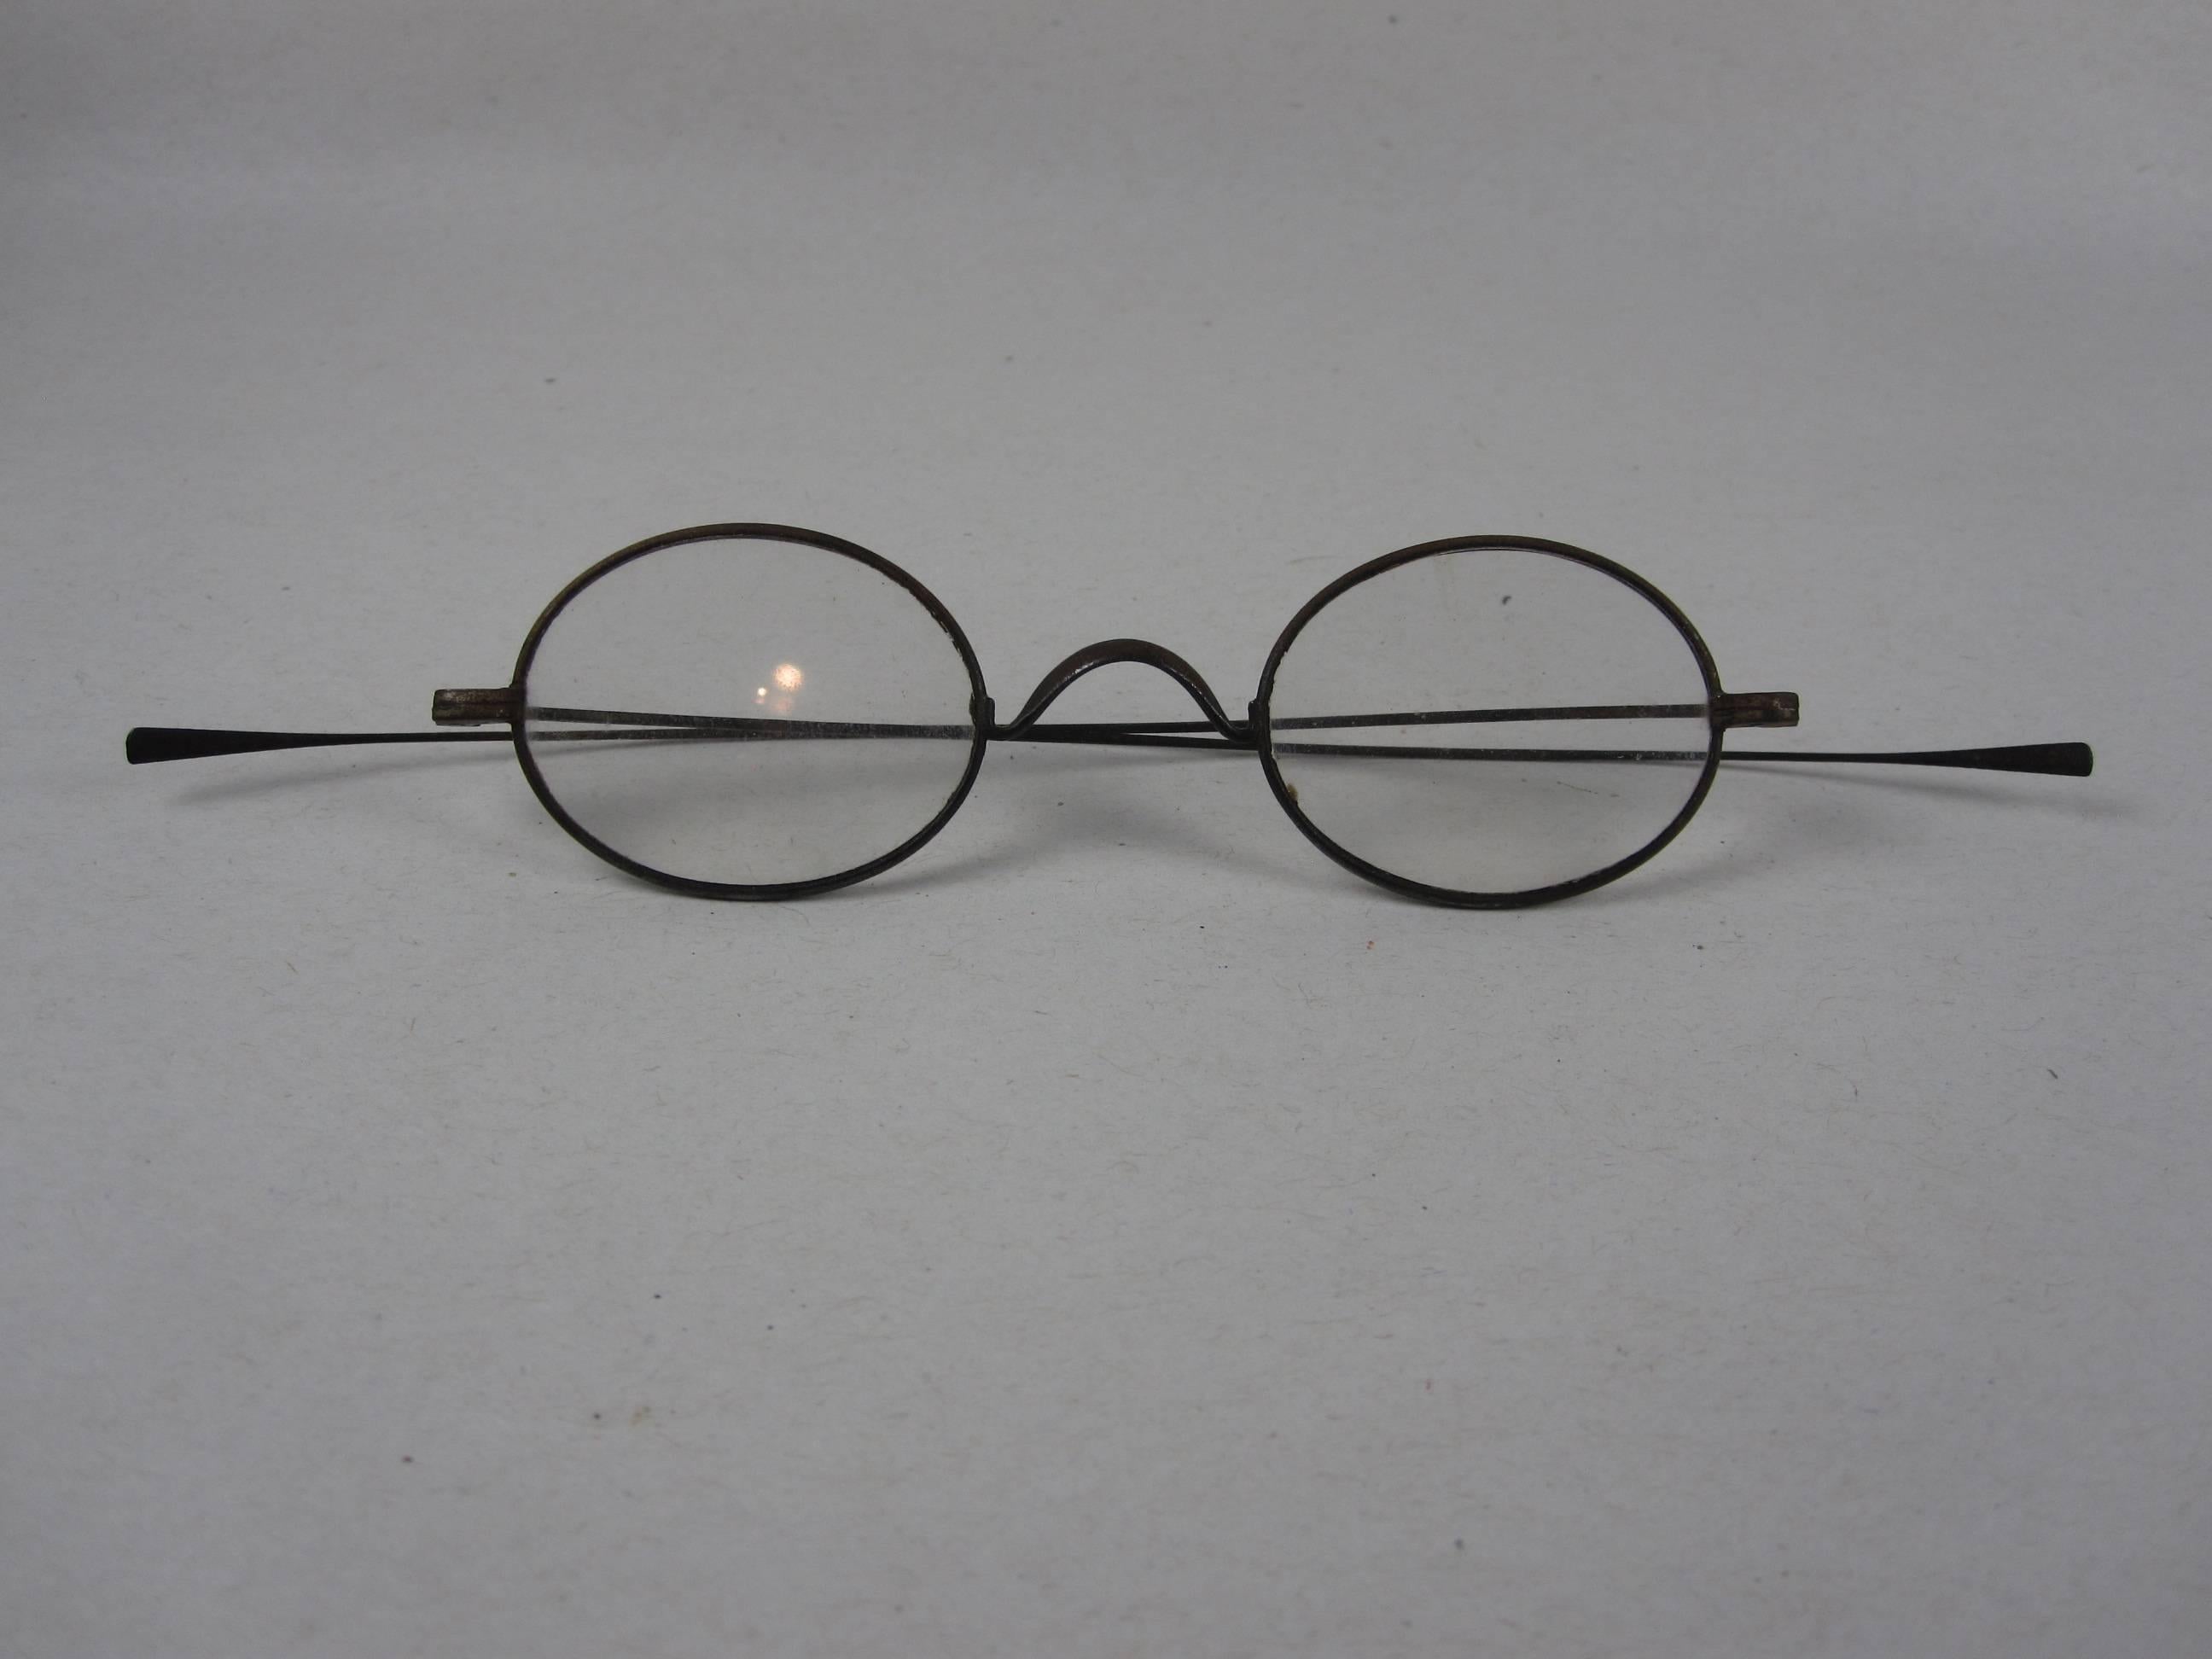 A delicate pair of handmade magnifying wire rim eye glasses from the American Civil War era, circa 1860. 

A great looking historical conversation piece or decor item. Use this pair to accessorize a desk, placed on an open book in a home library, or